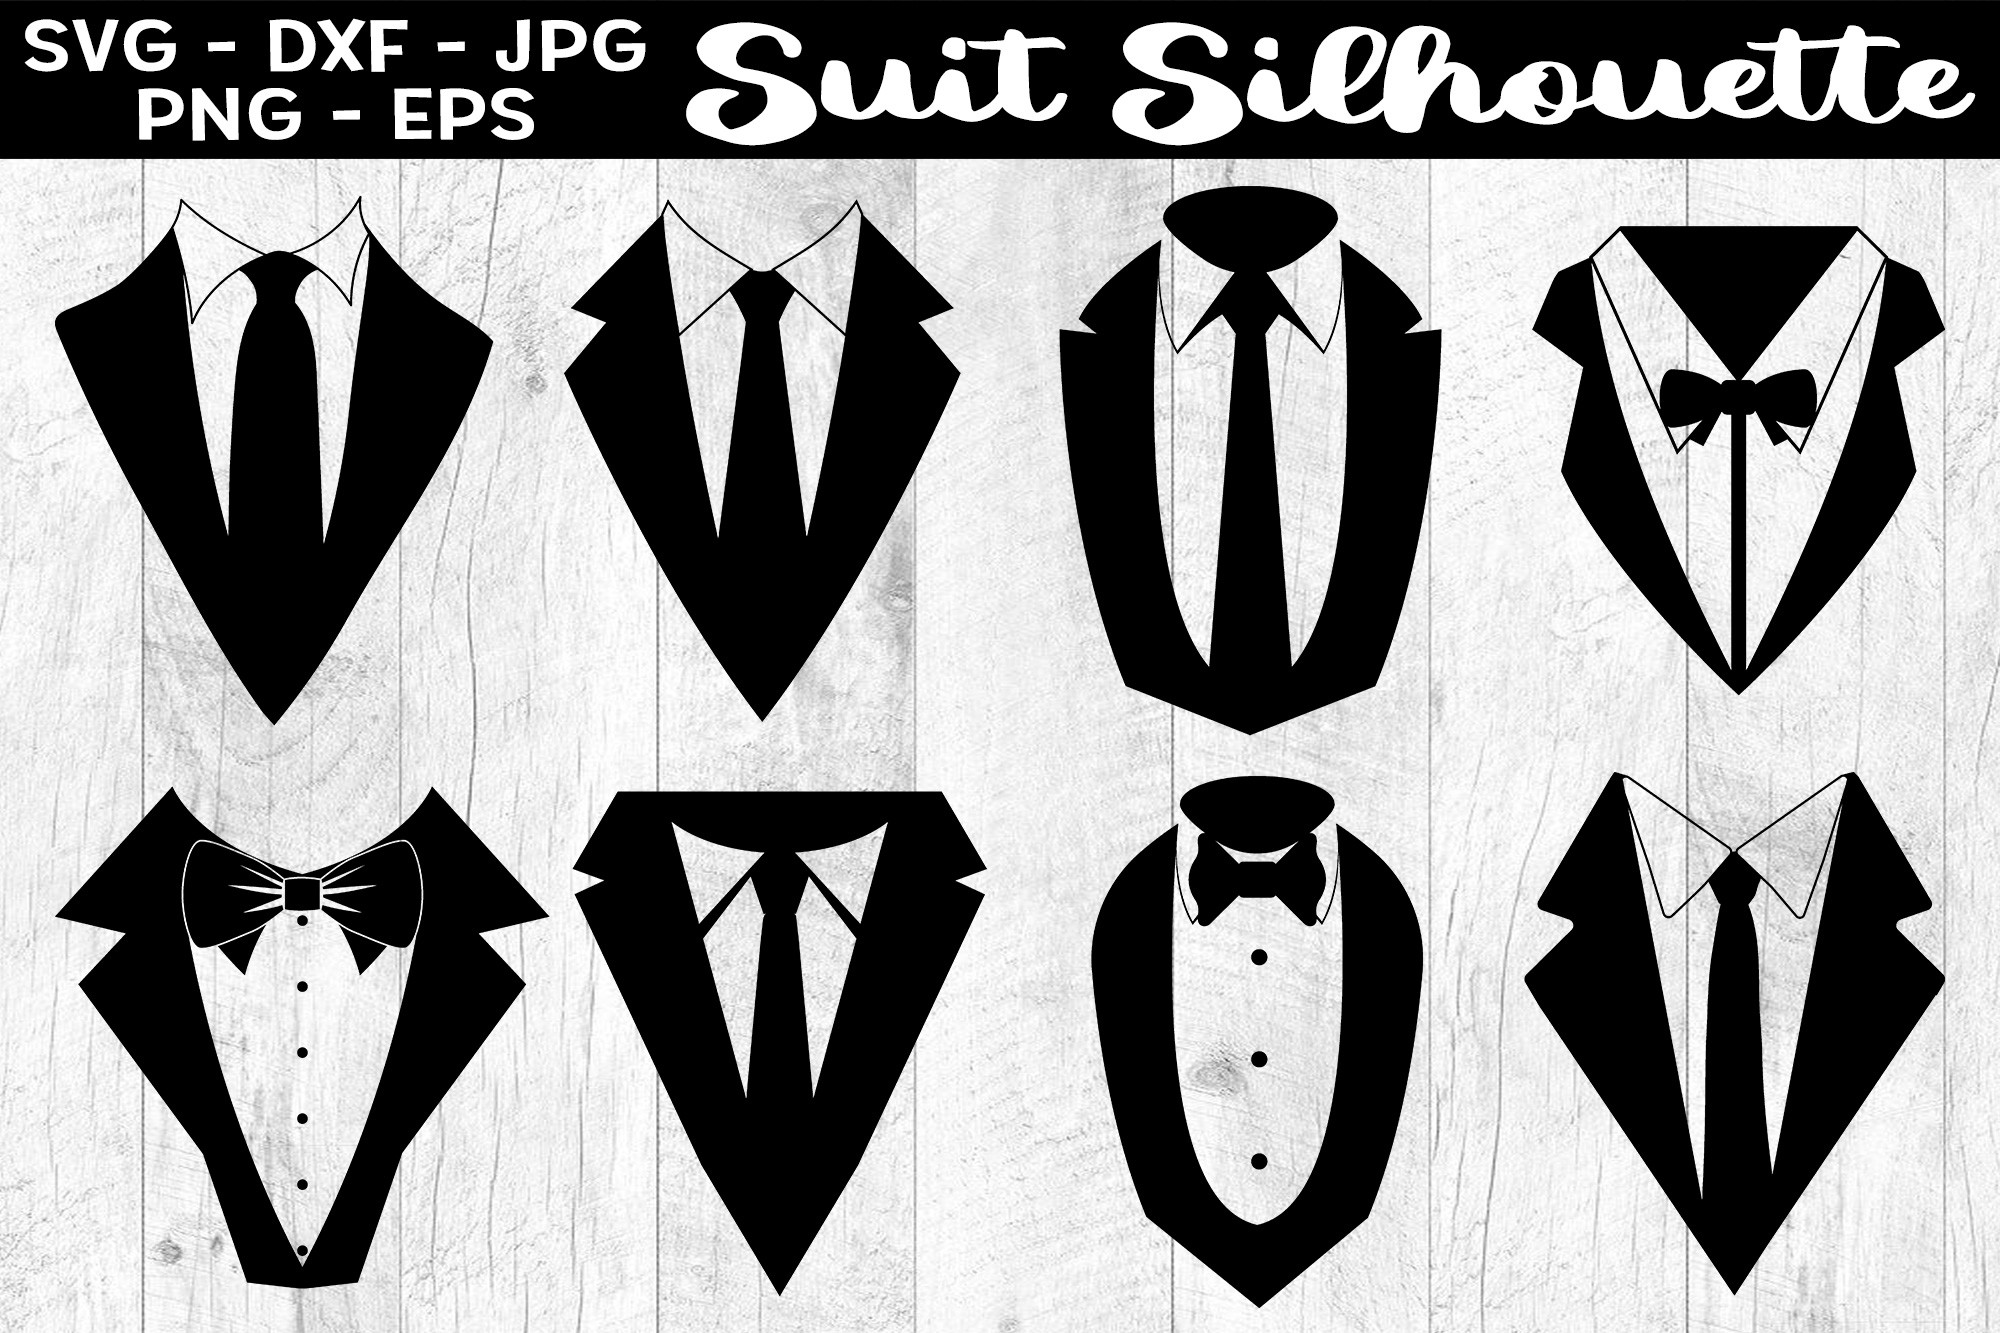 Suit Silhouettes Tuxedo SVG EPS PNG Graphic by Aleksa Popovic ...